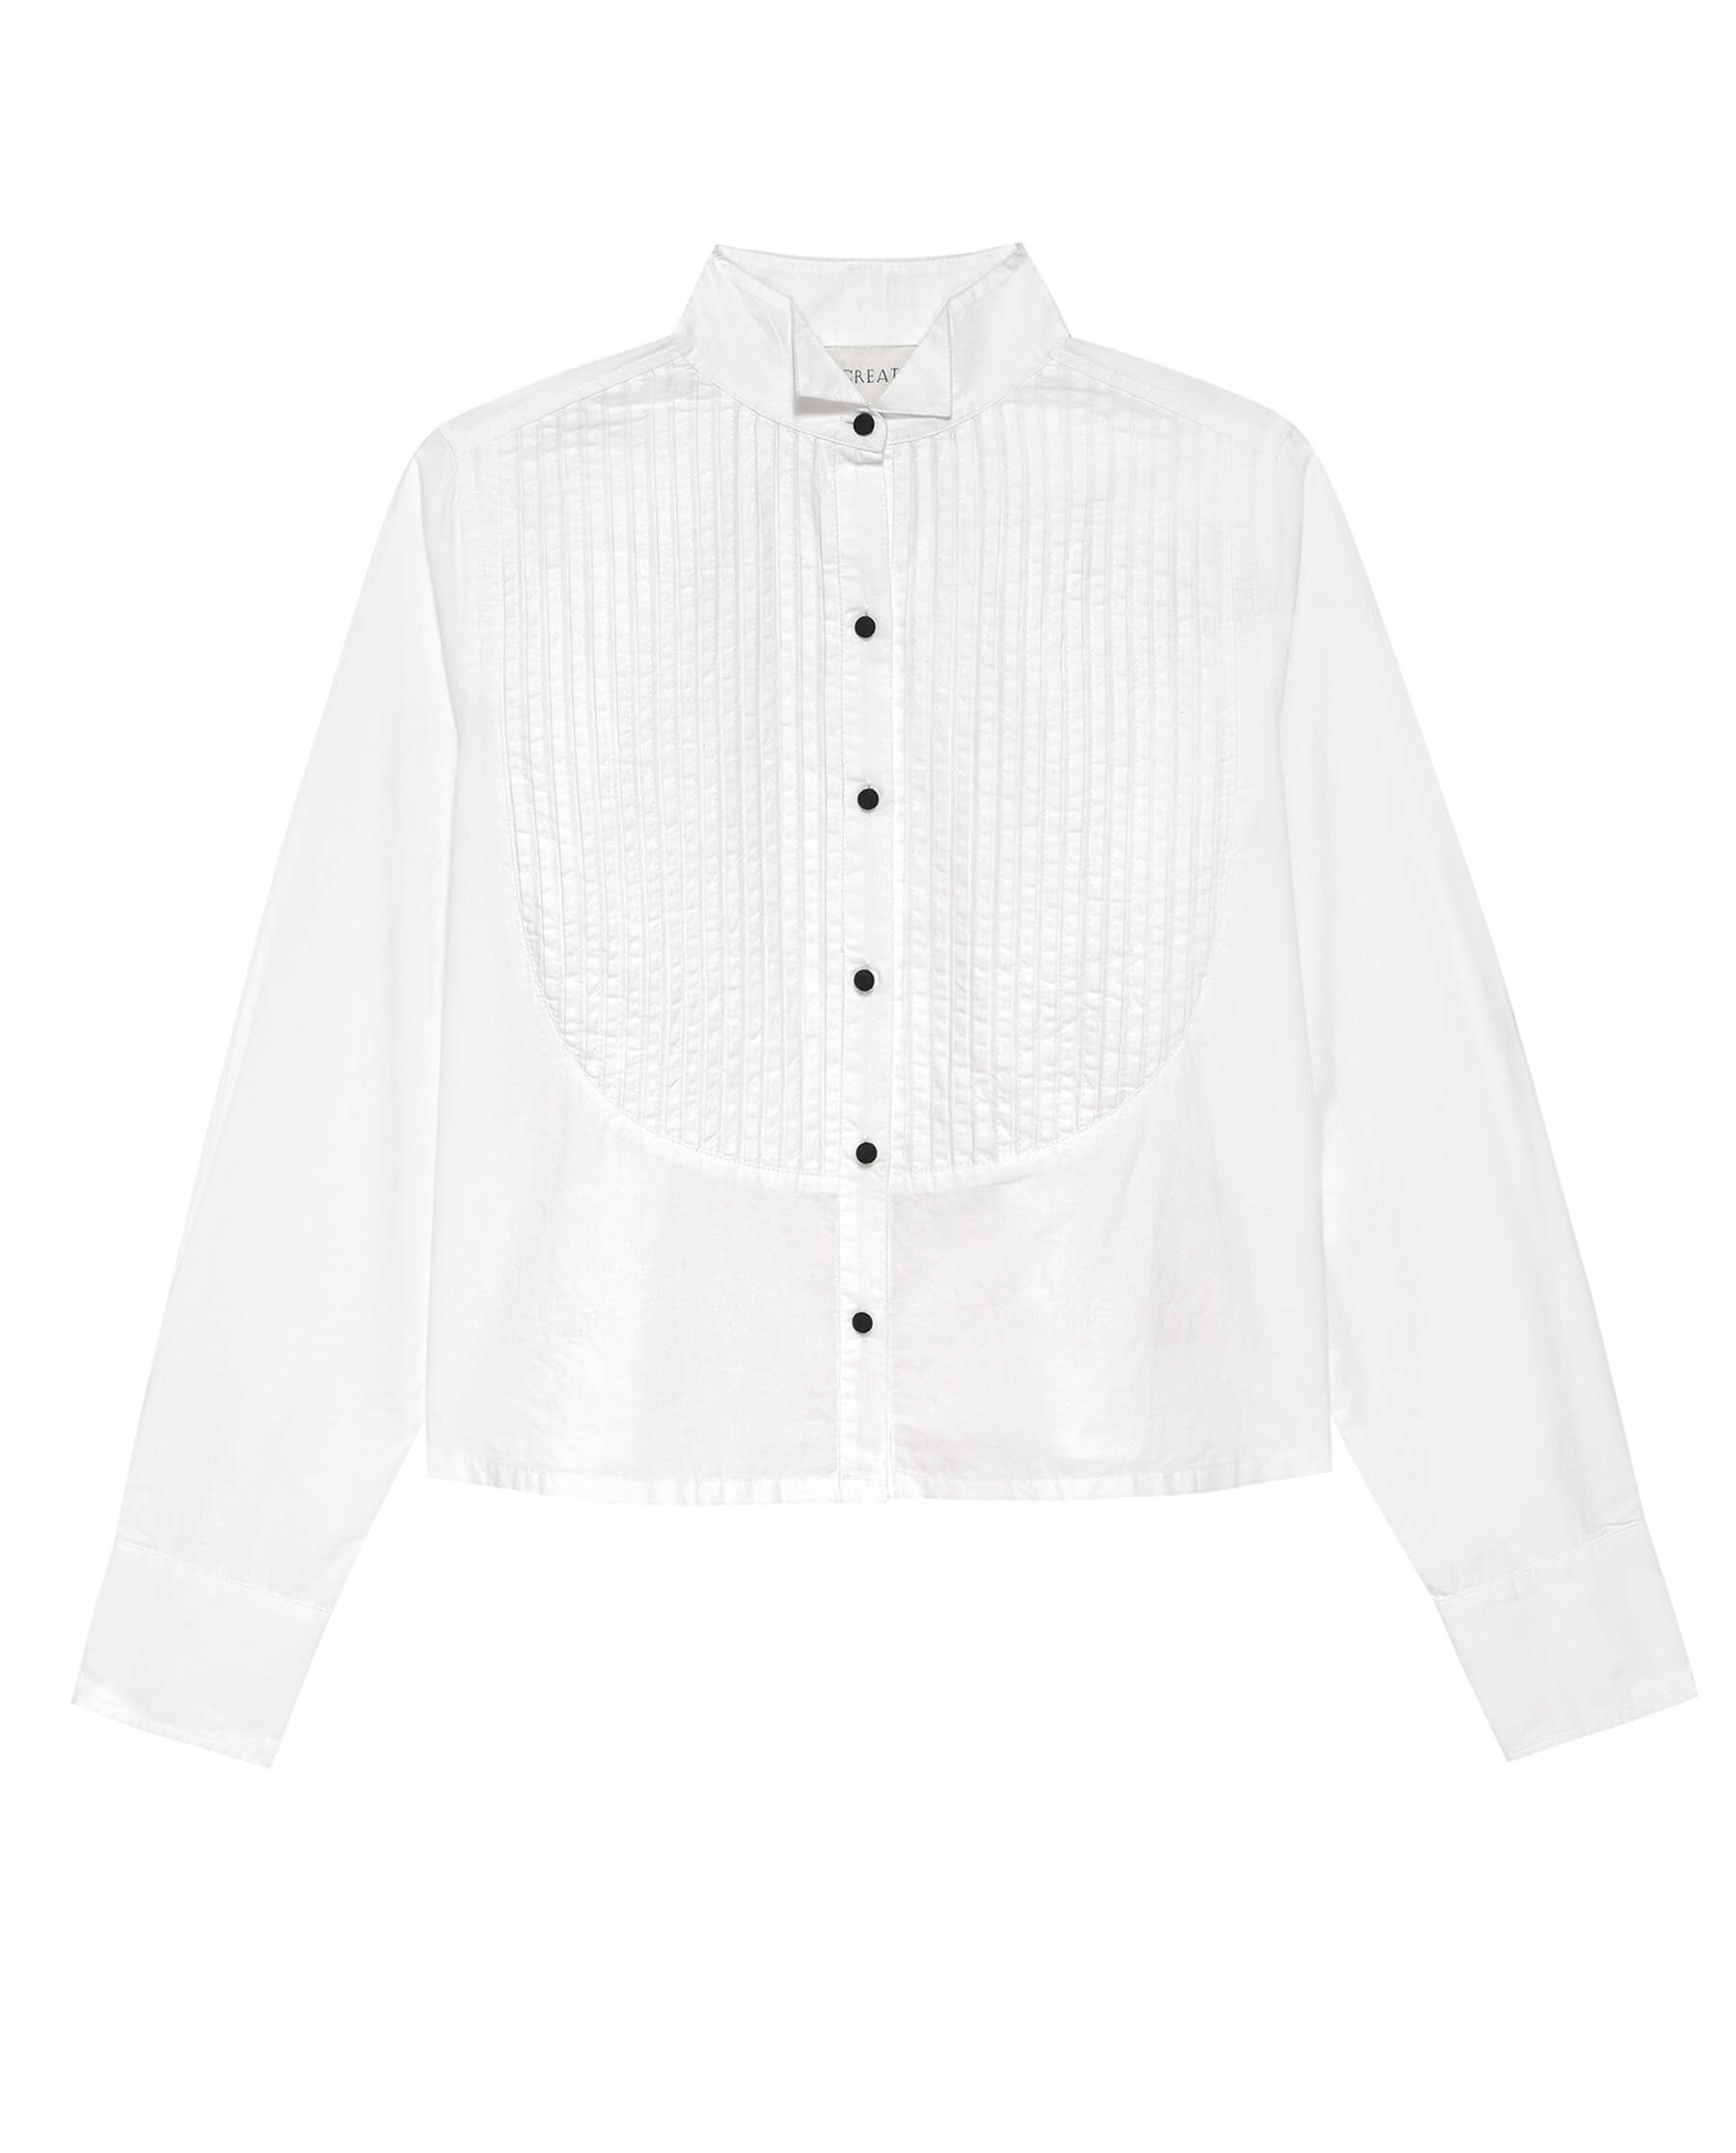 The Pleated Tux Top. -- White